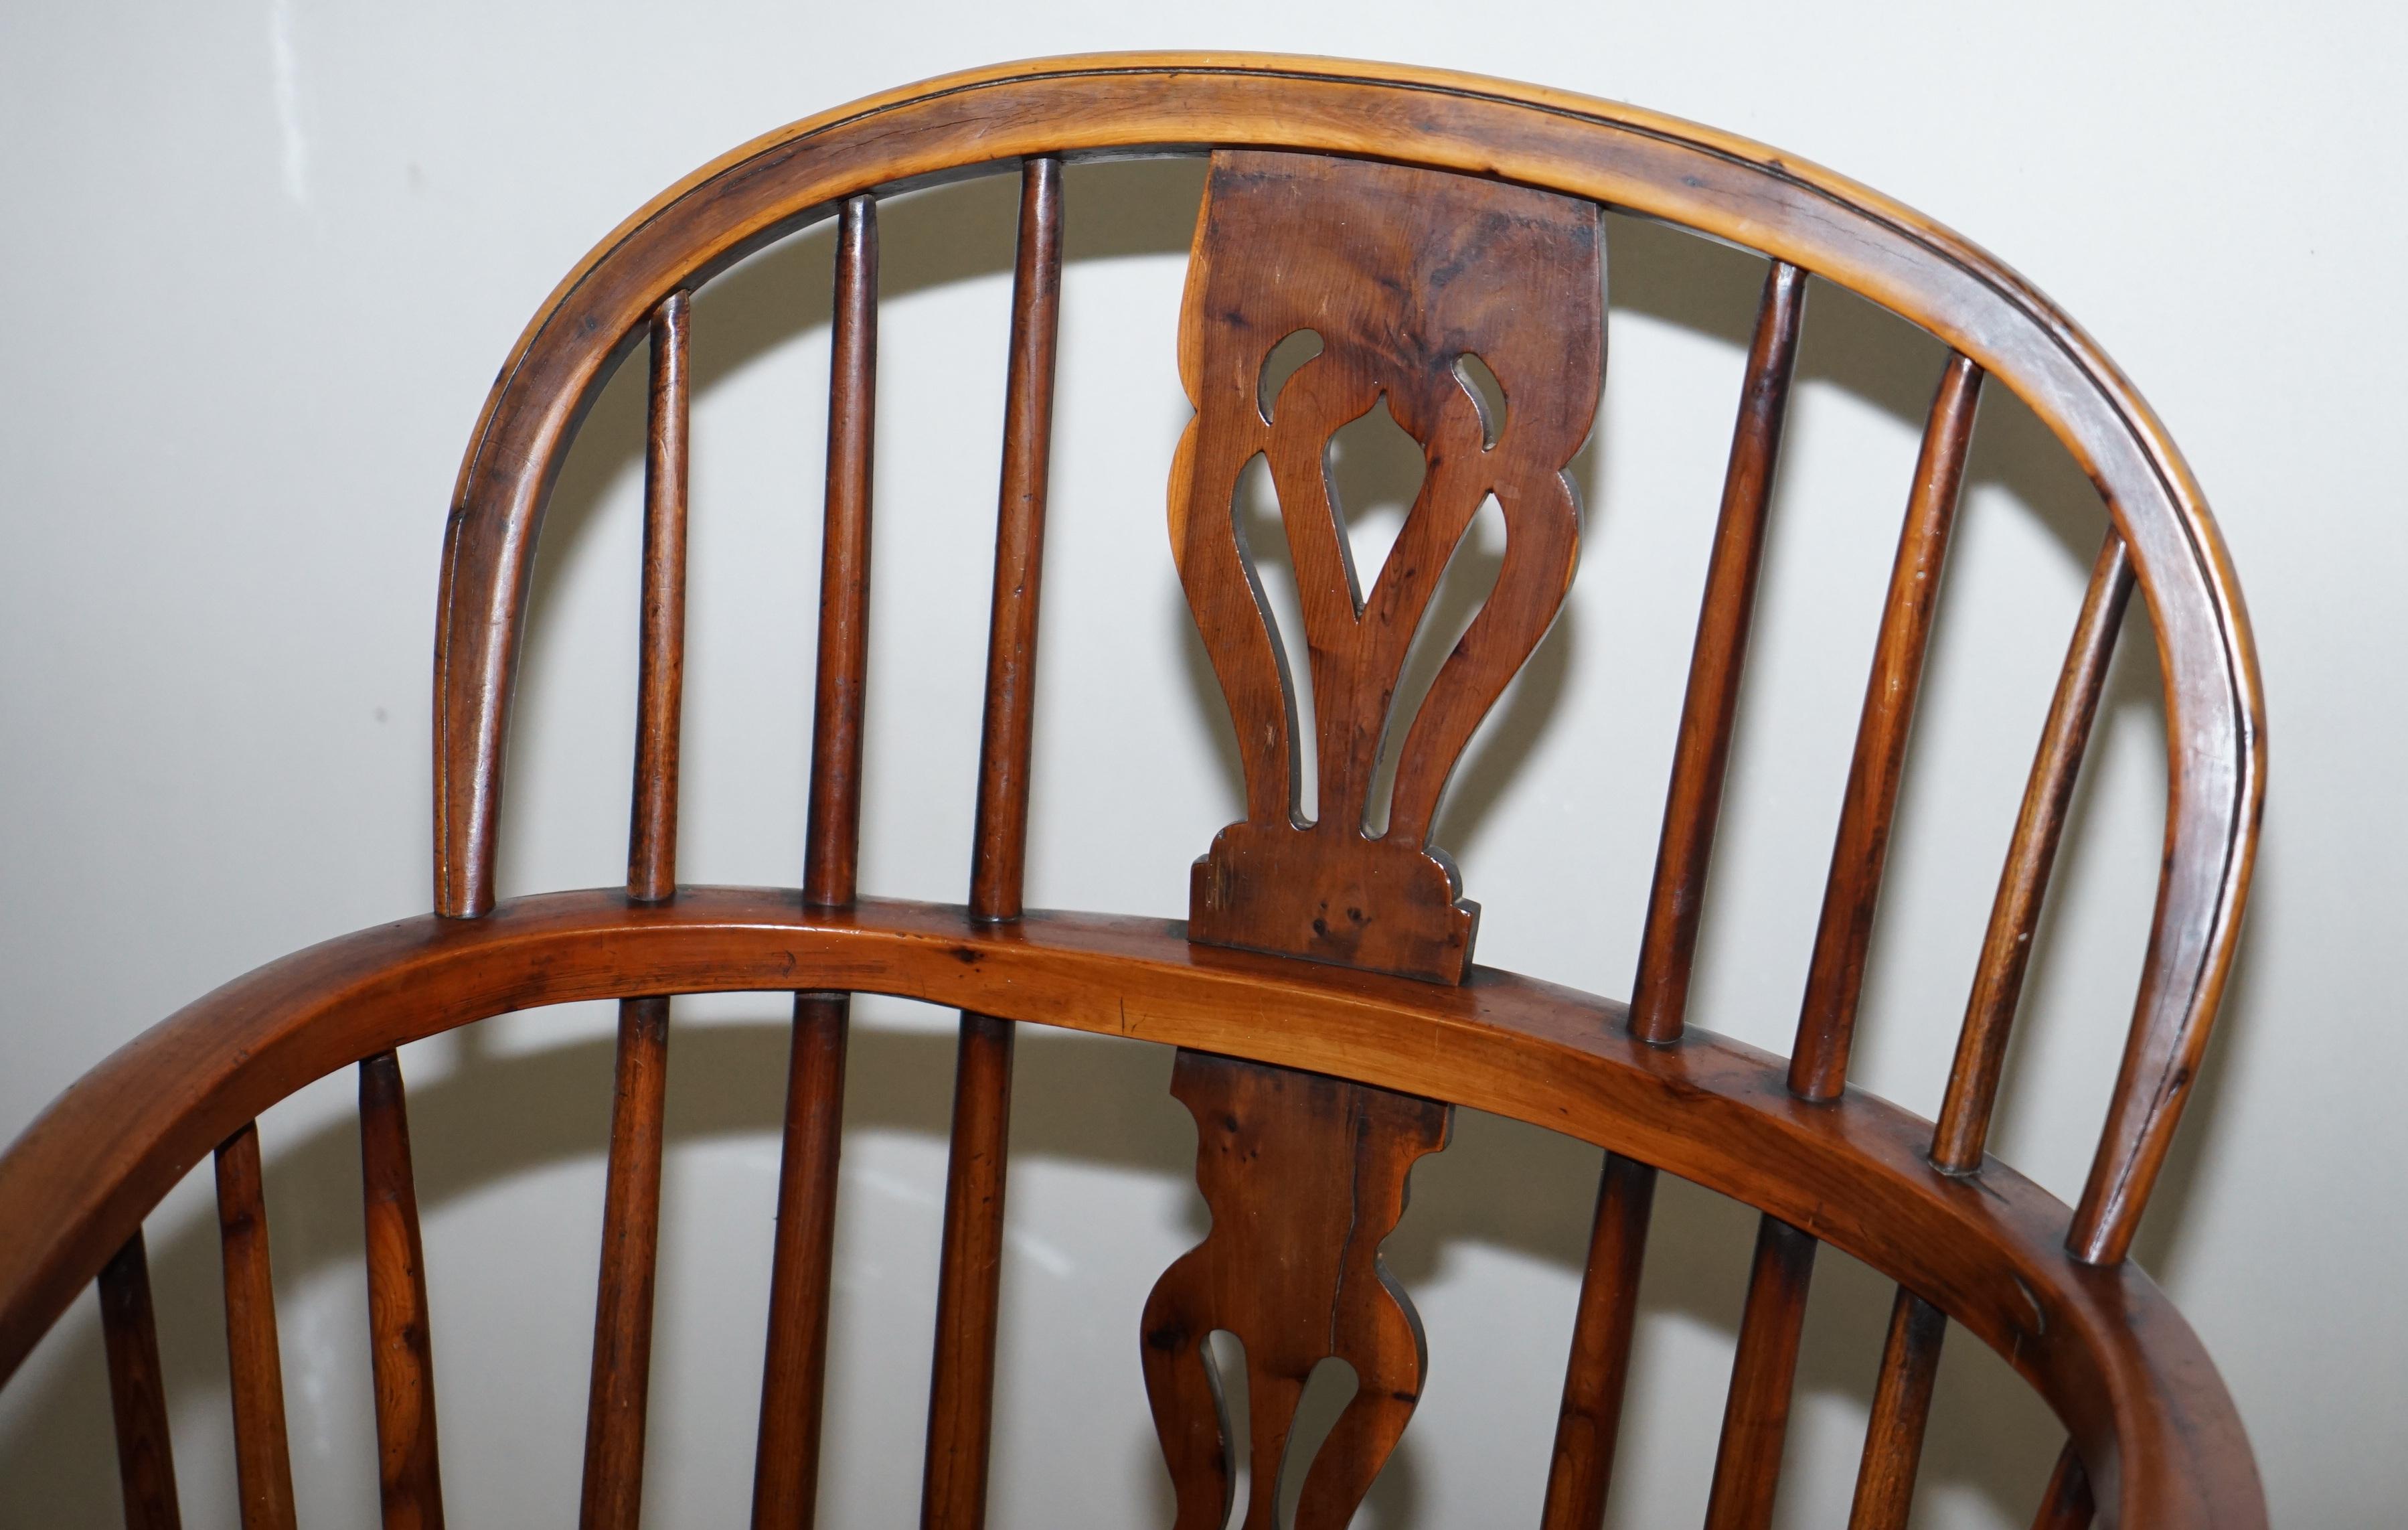 High Victorian 1 of 6 Burr Yew Wood Windsor Armchairs circa 1860 English Countryhouse Furniture For Sale